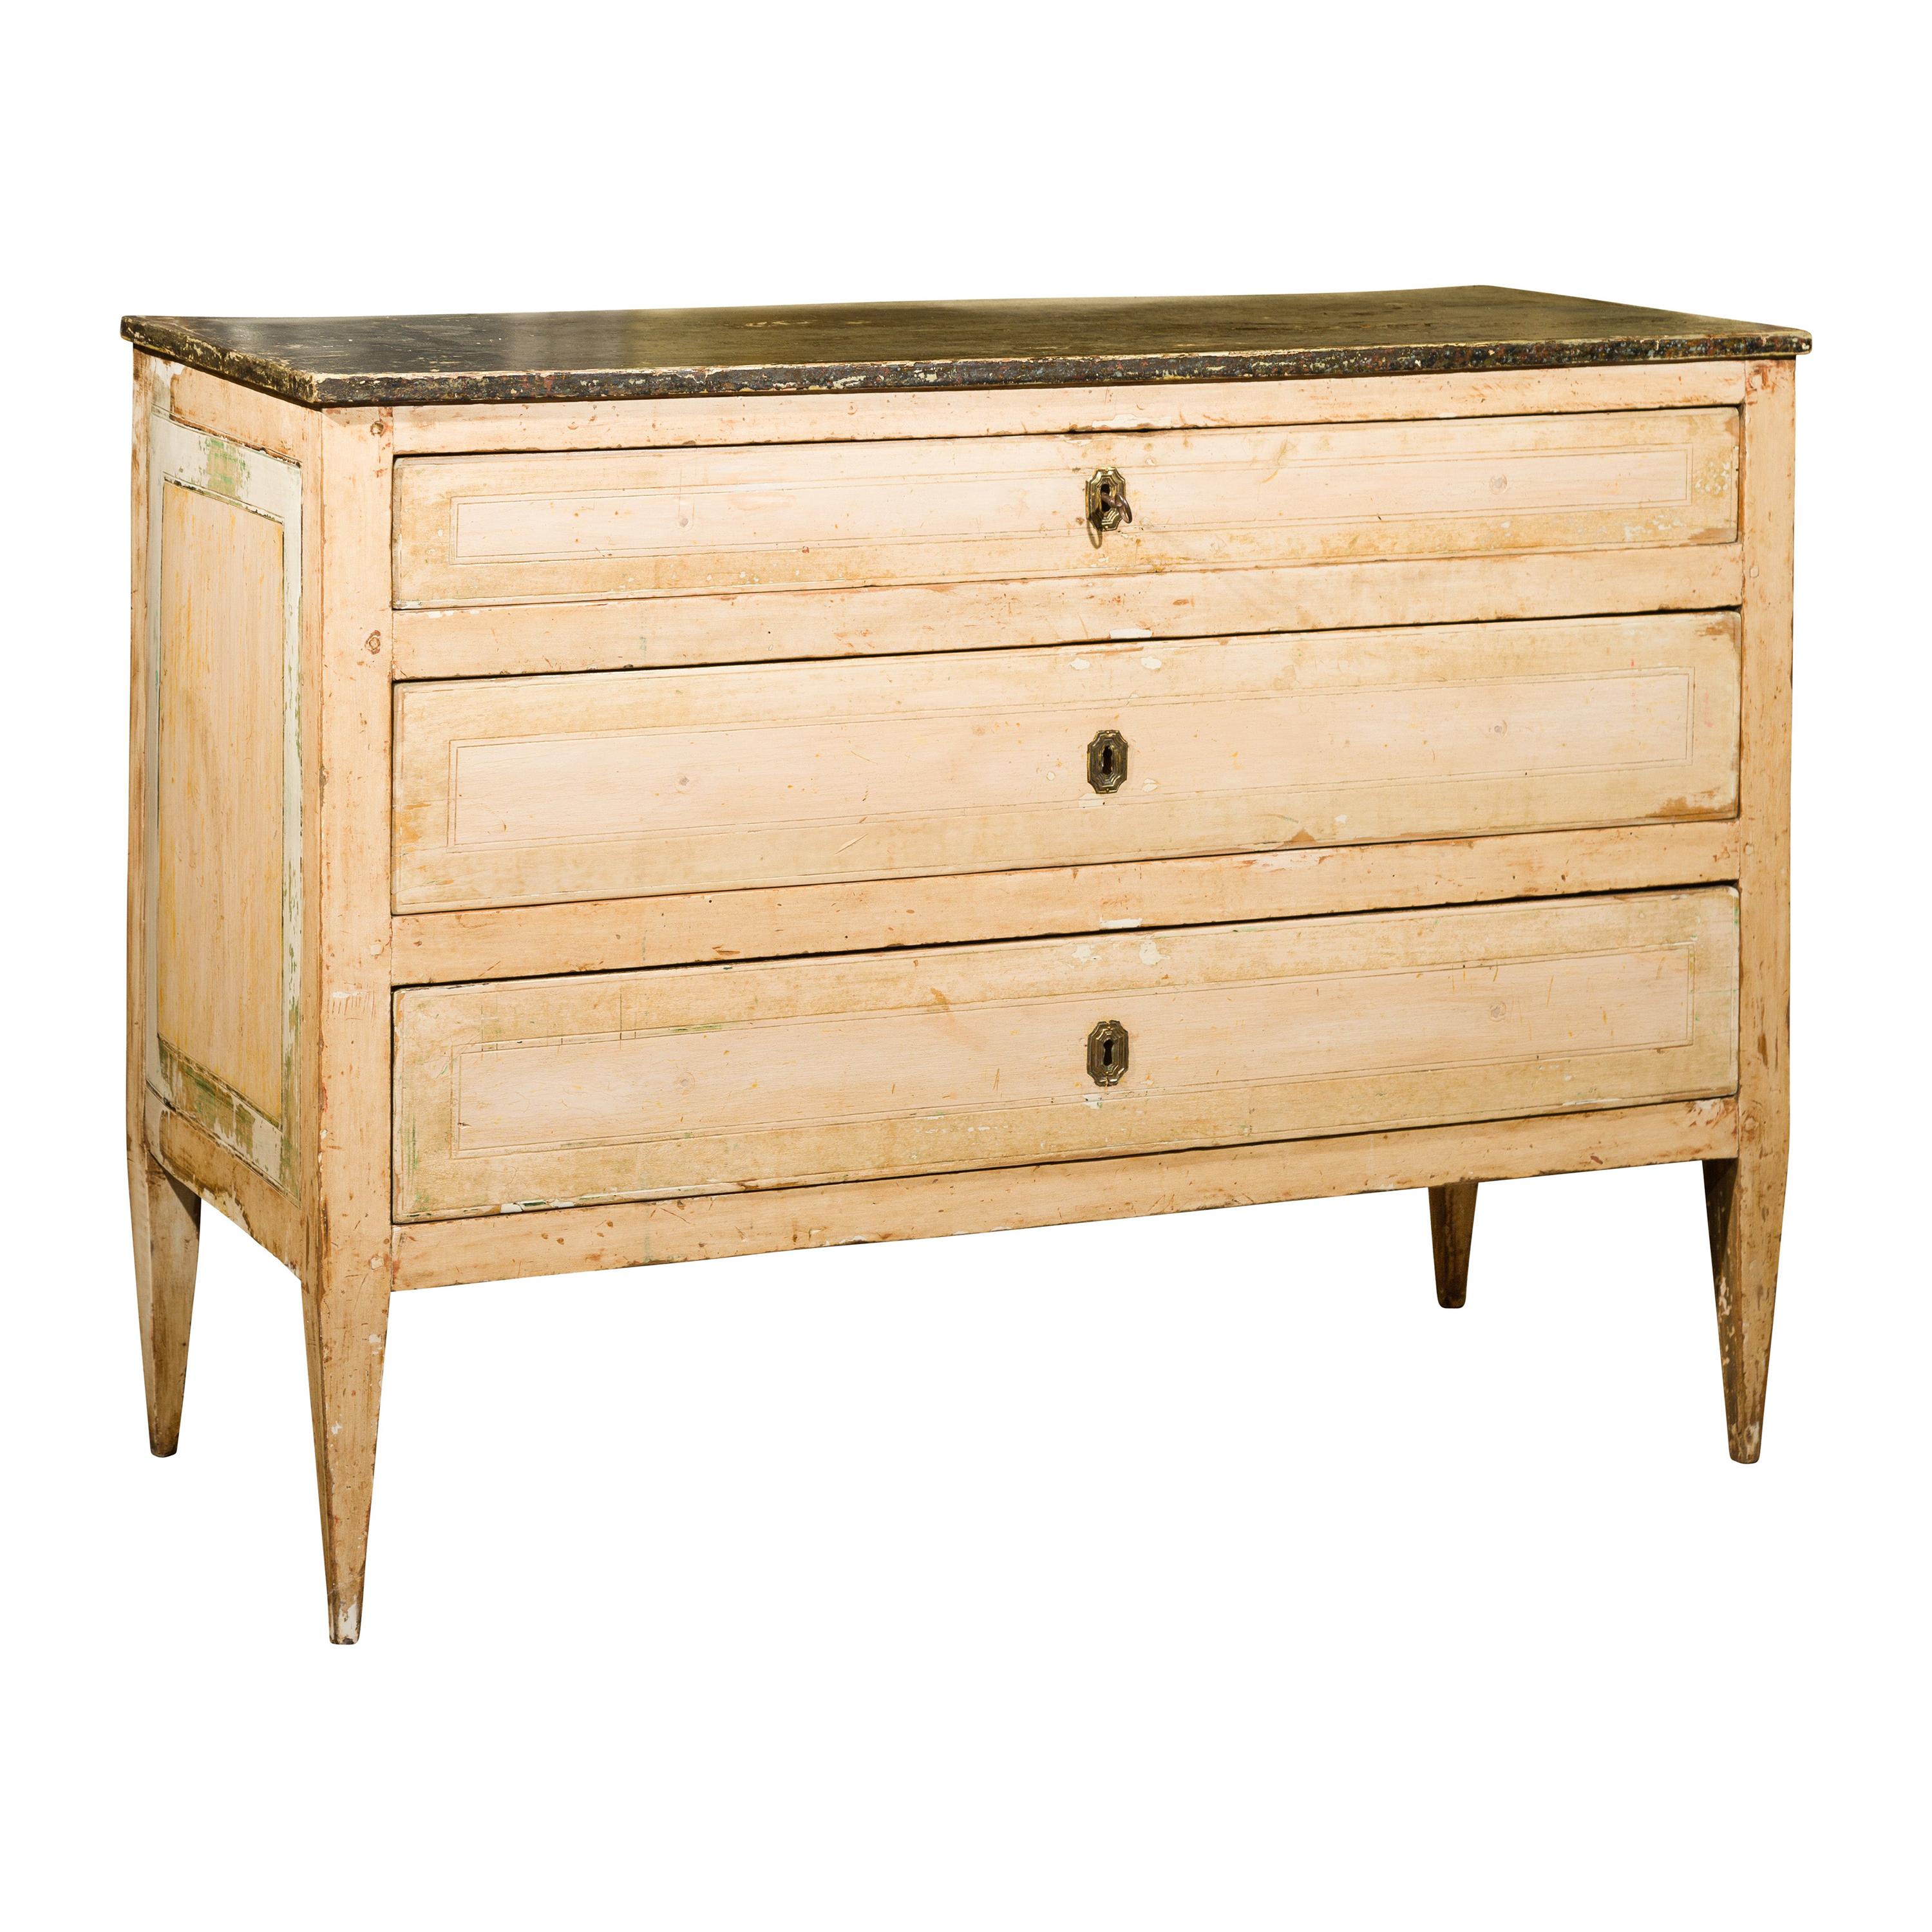 Italian Painted Wood Three-Drawer Commode with Tapered Legs, circa 1800